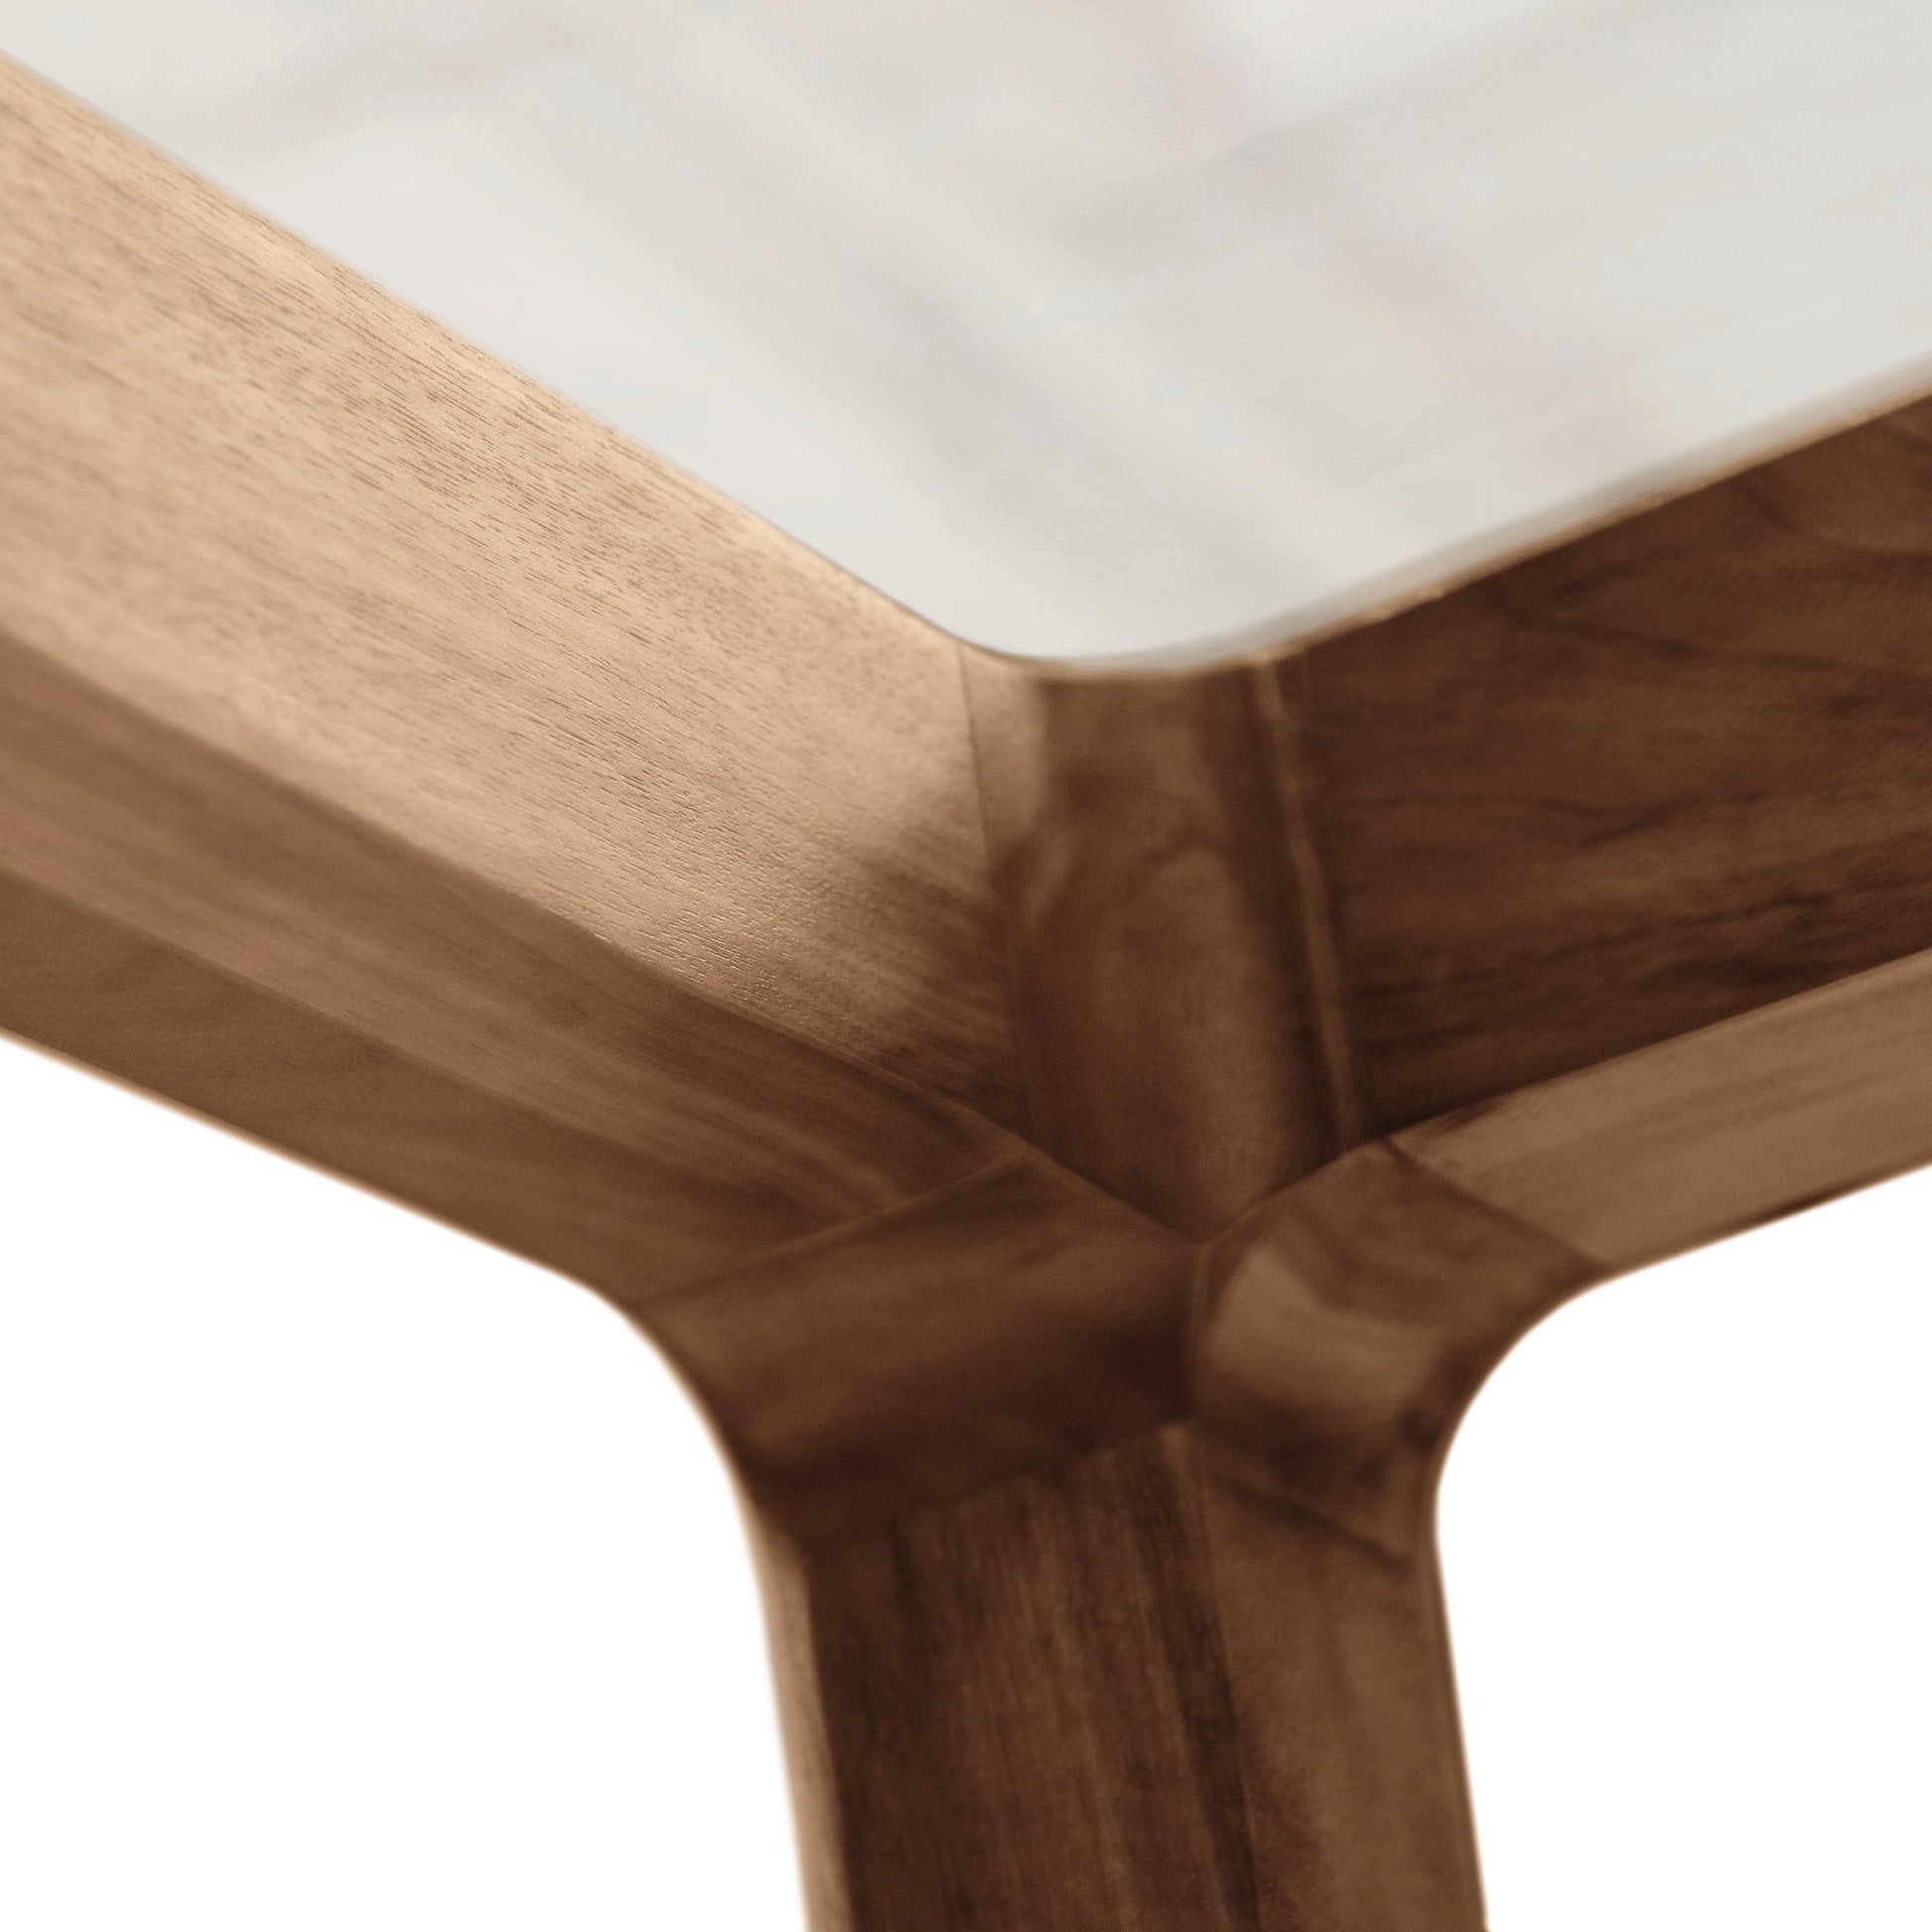 Close-up of a walnut table corner showing the grain detail, minimalist design by Copeland Furniture, and joinery of the Lisse Glass Top Dining Table.